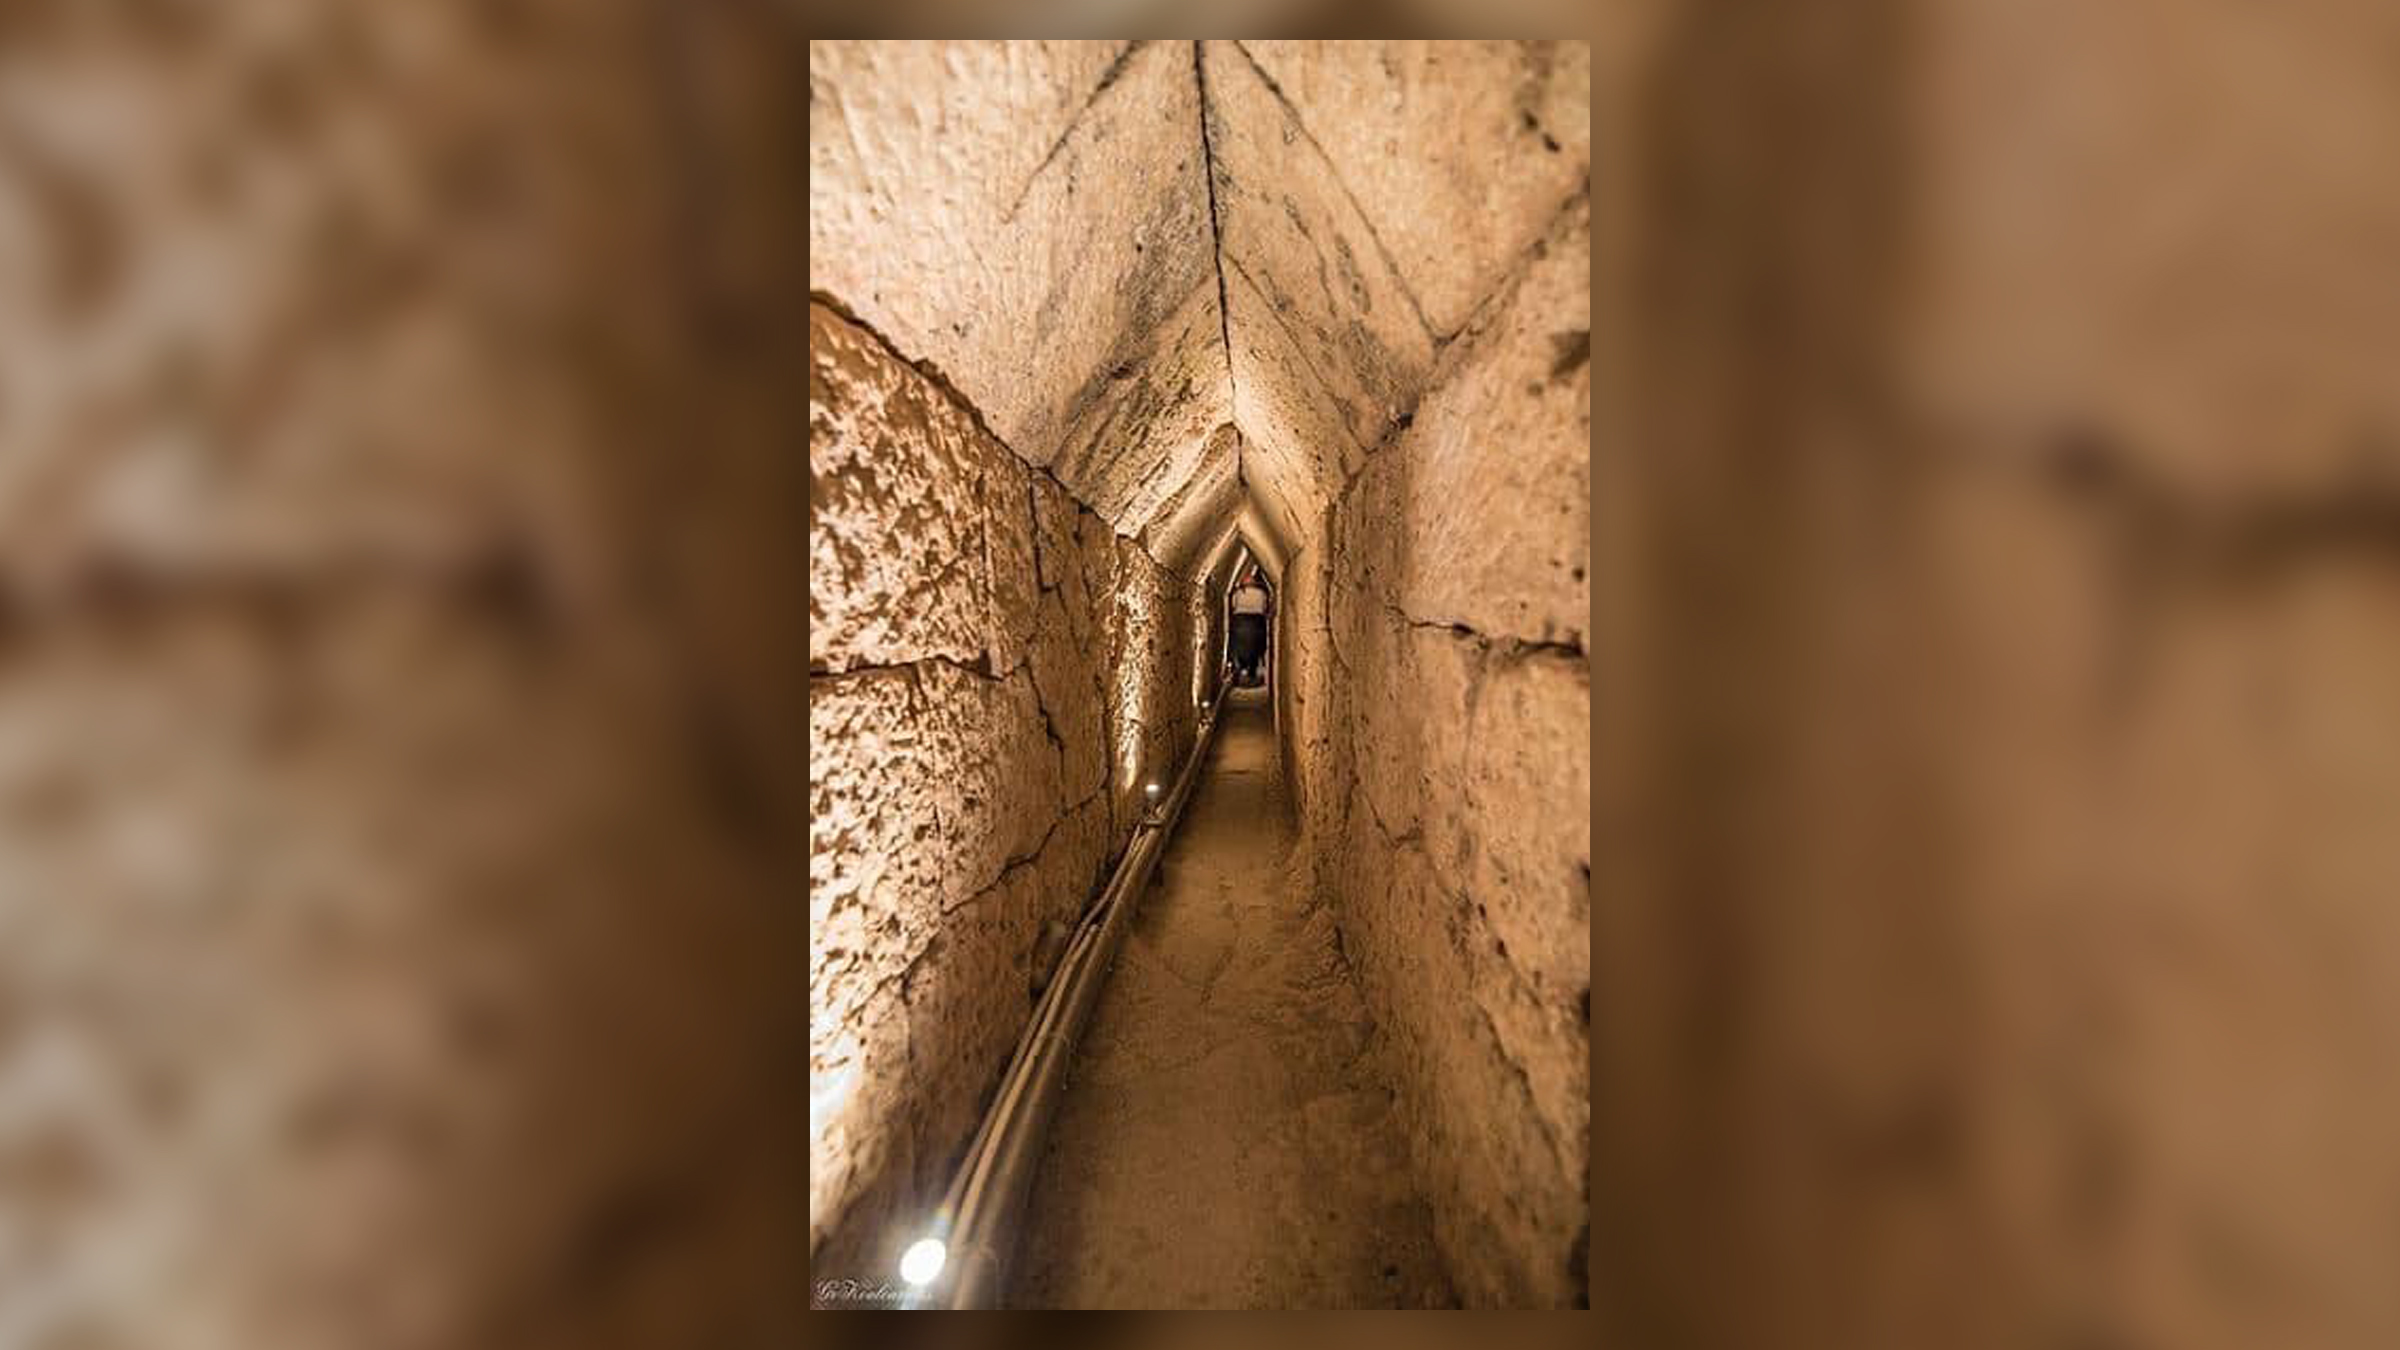 The tunnel is about 6.6 feet (2 meters) high and is similar to another ancient tunnel built at Samos in Greece.